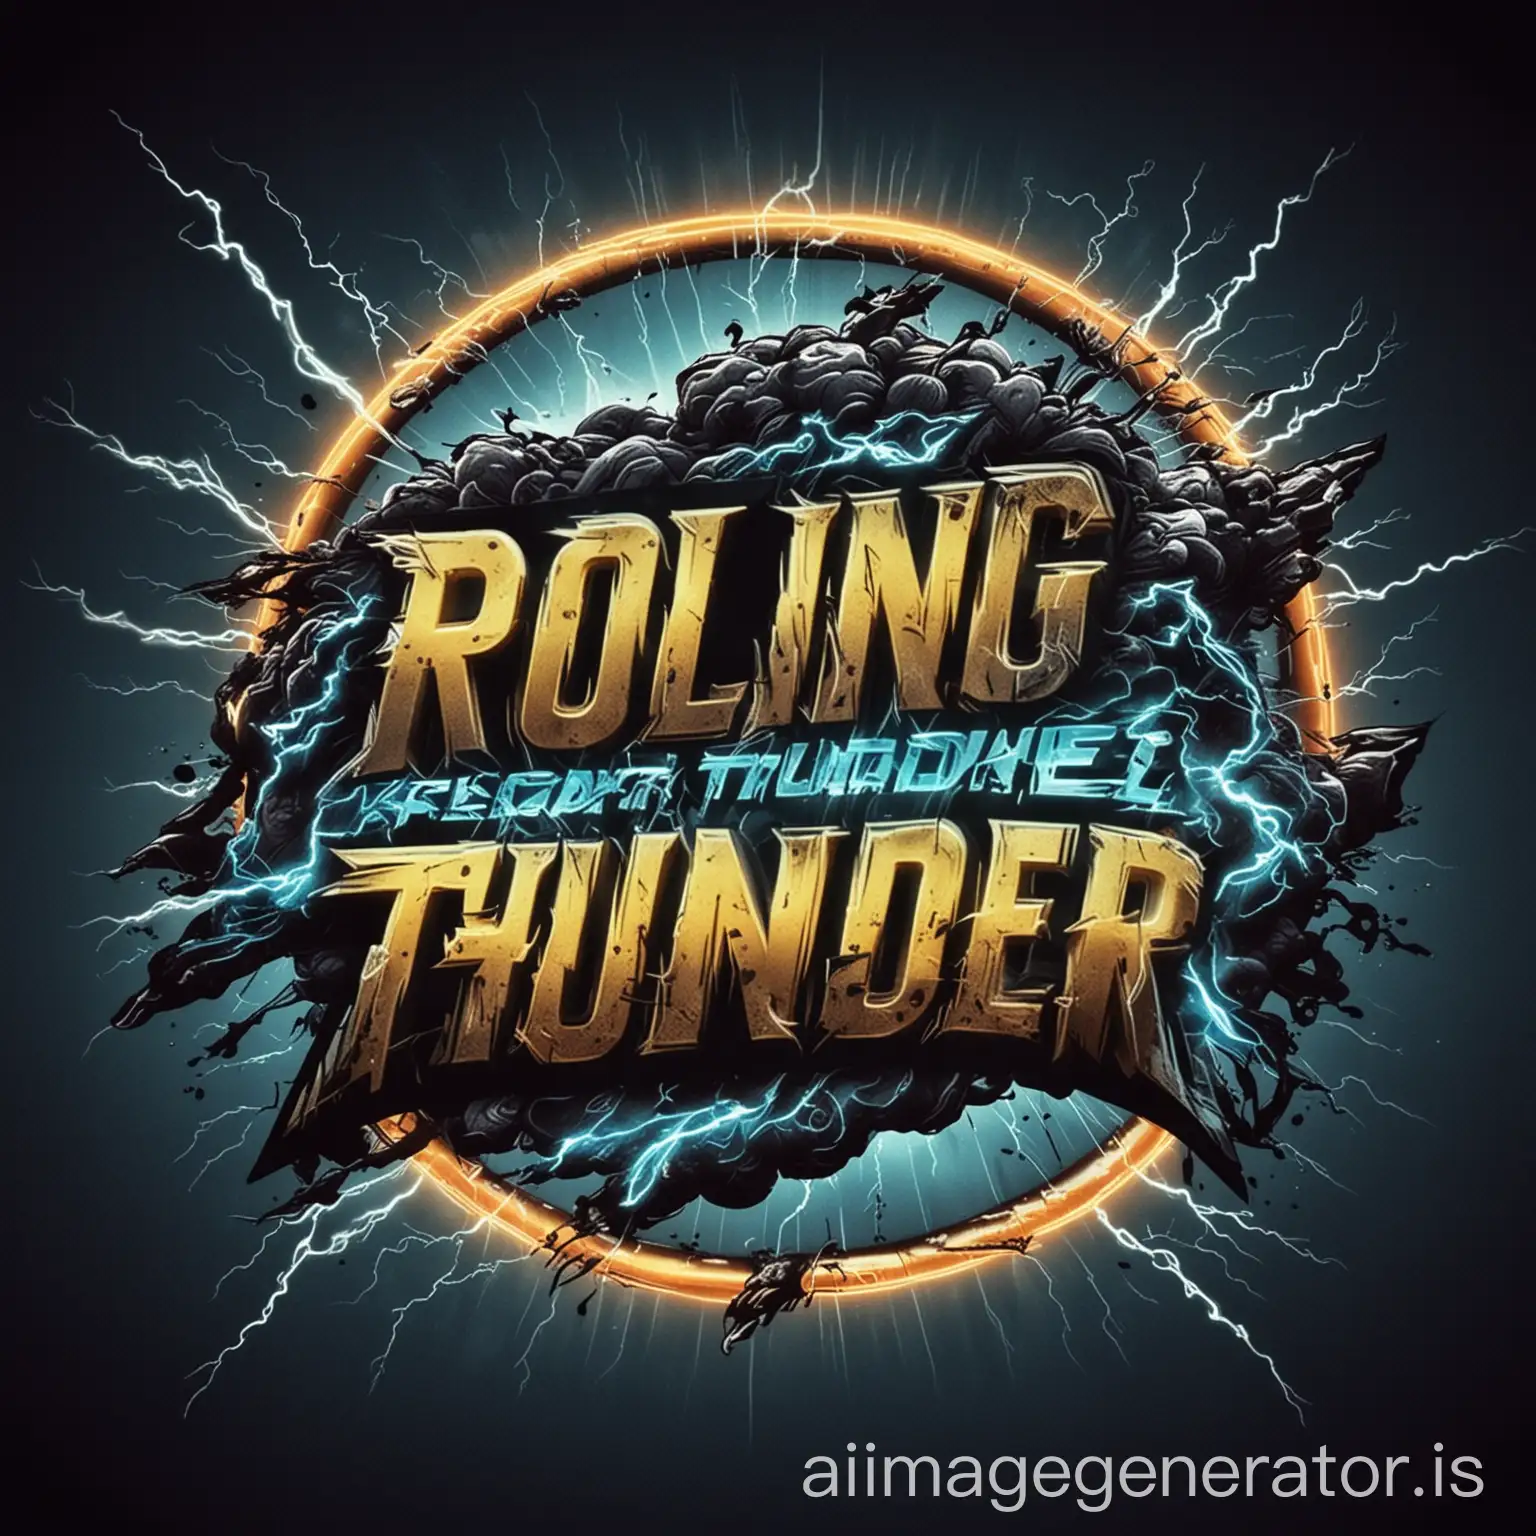 Intense-Rolling-Thunder-Sports-Team-Instagram-Profile-Picture-Design